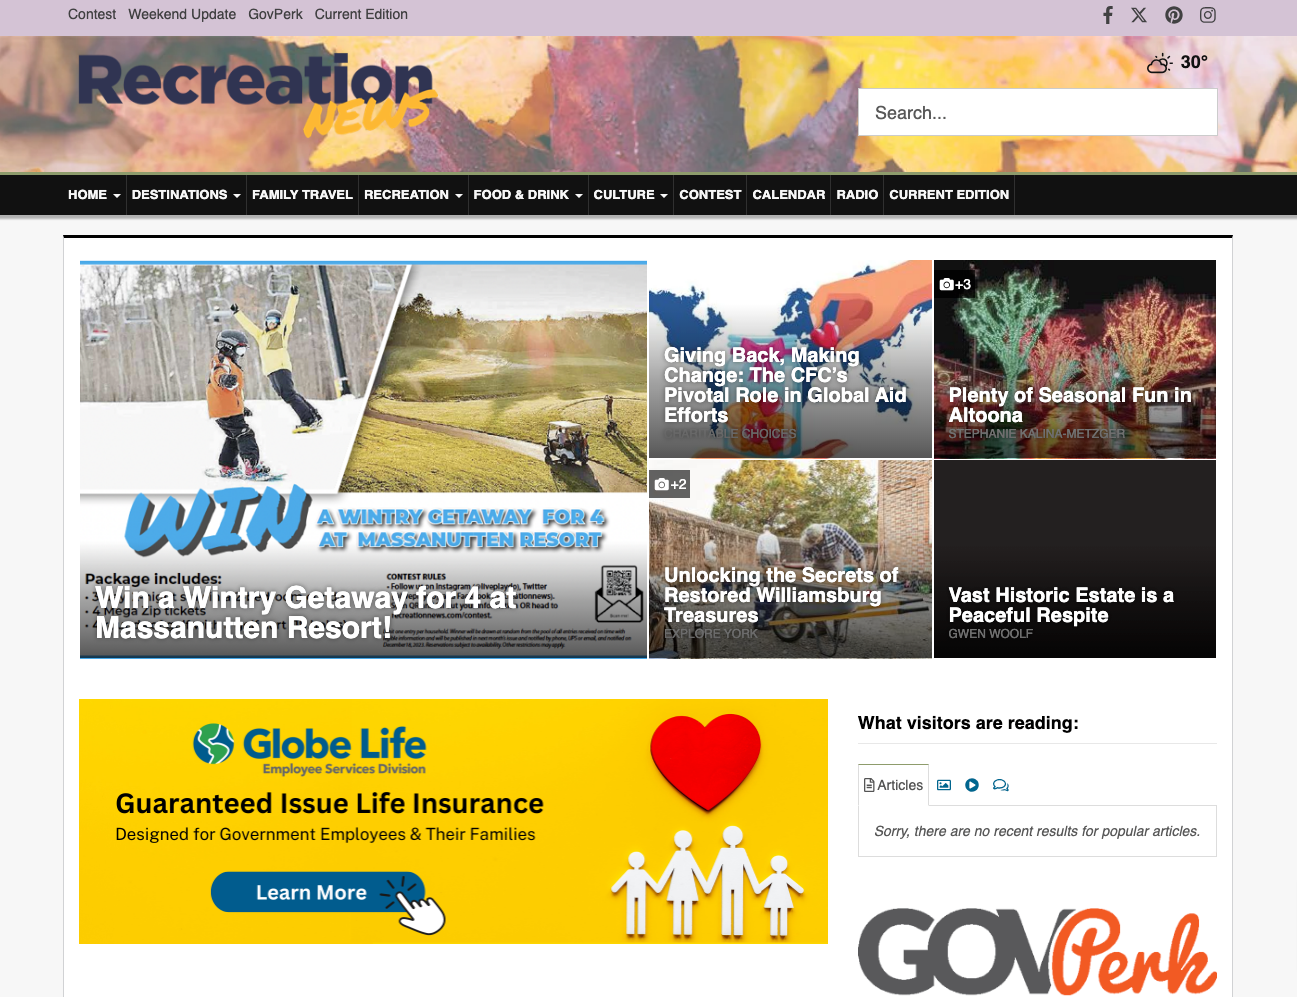 The old Recreation News Website Layout picture